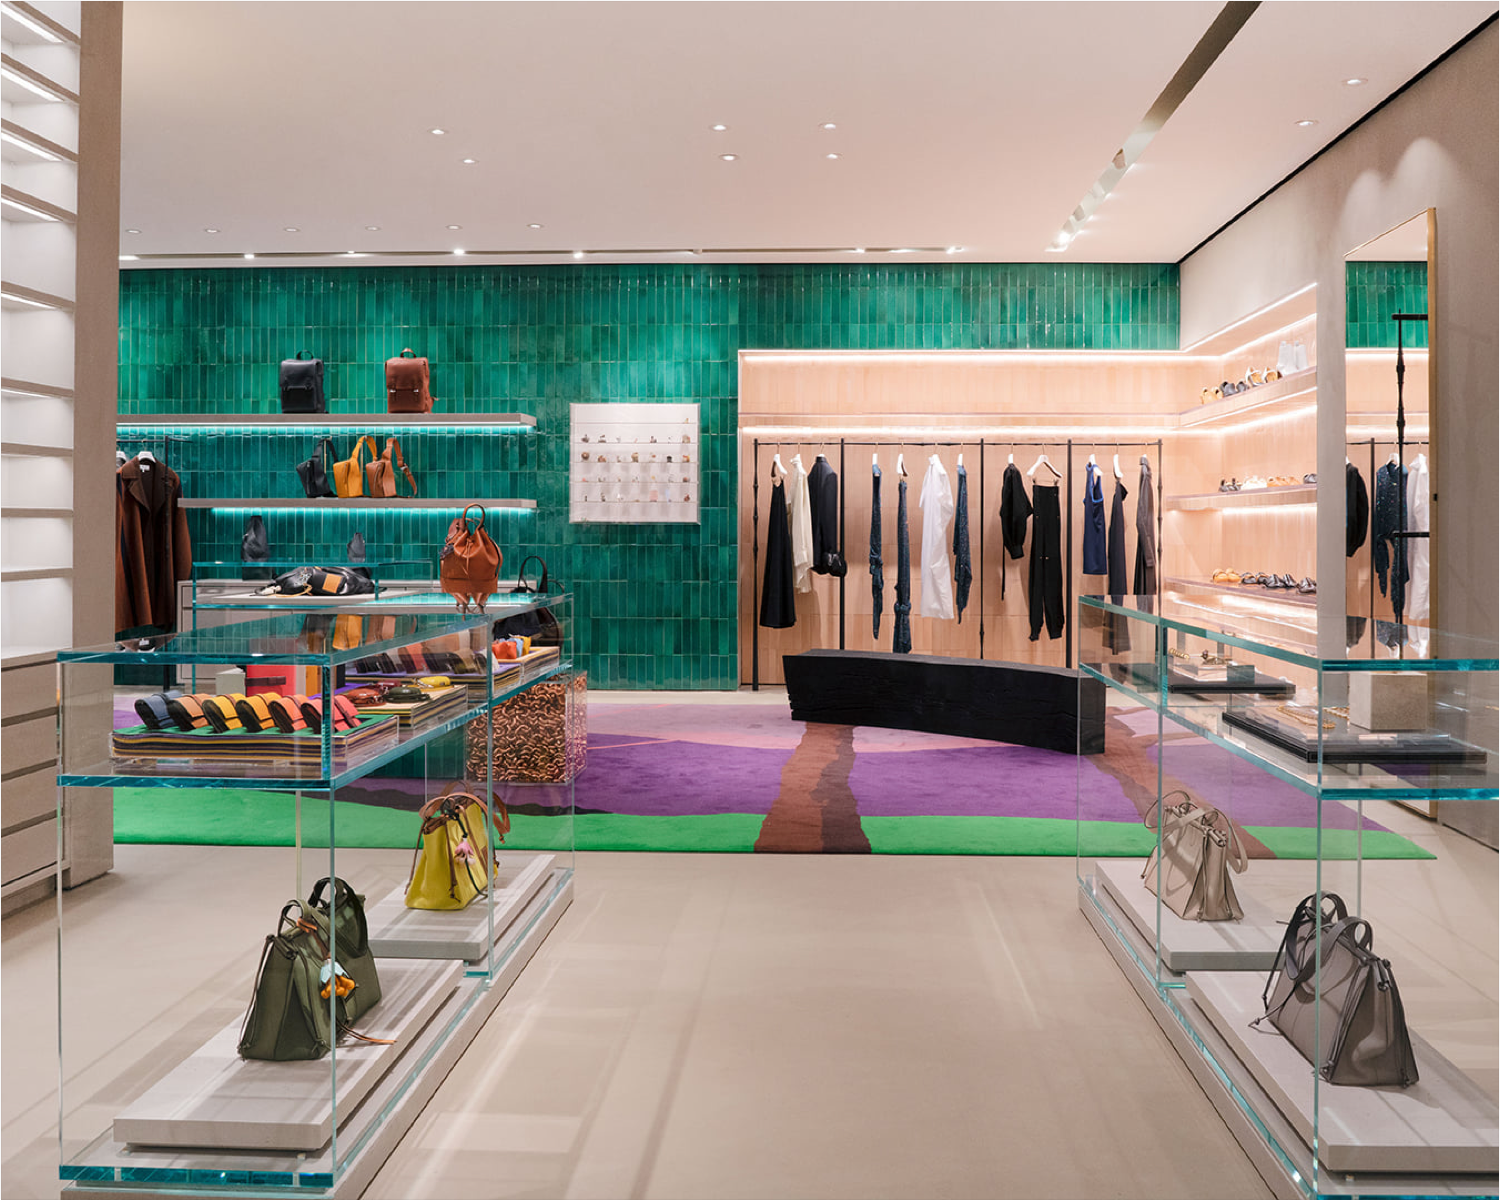 Loewe opens new Los Angeles flagship on Rodeo Drive